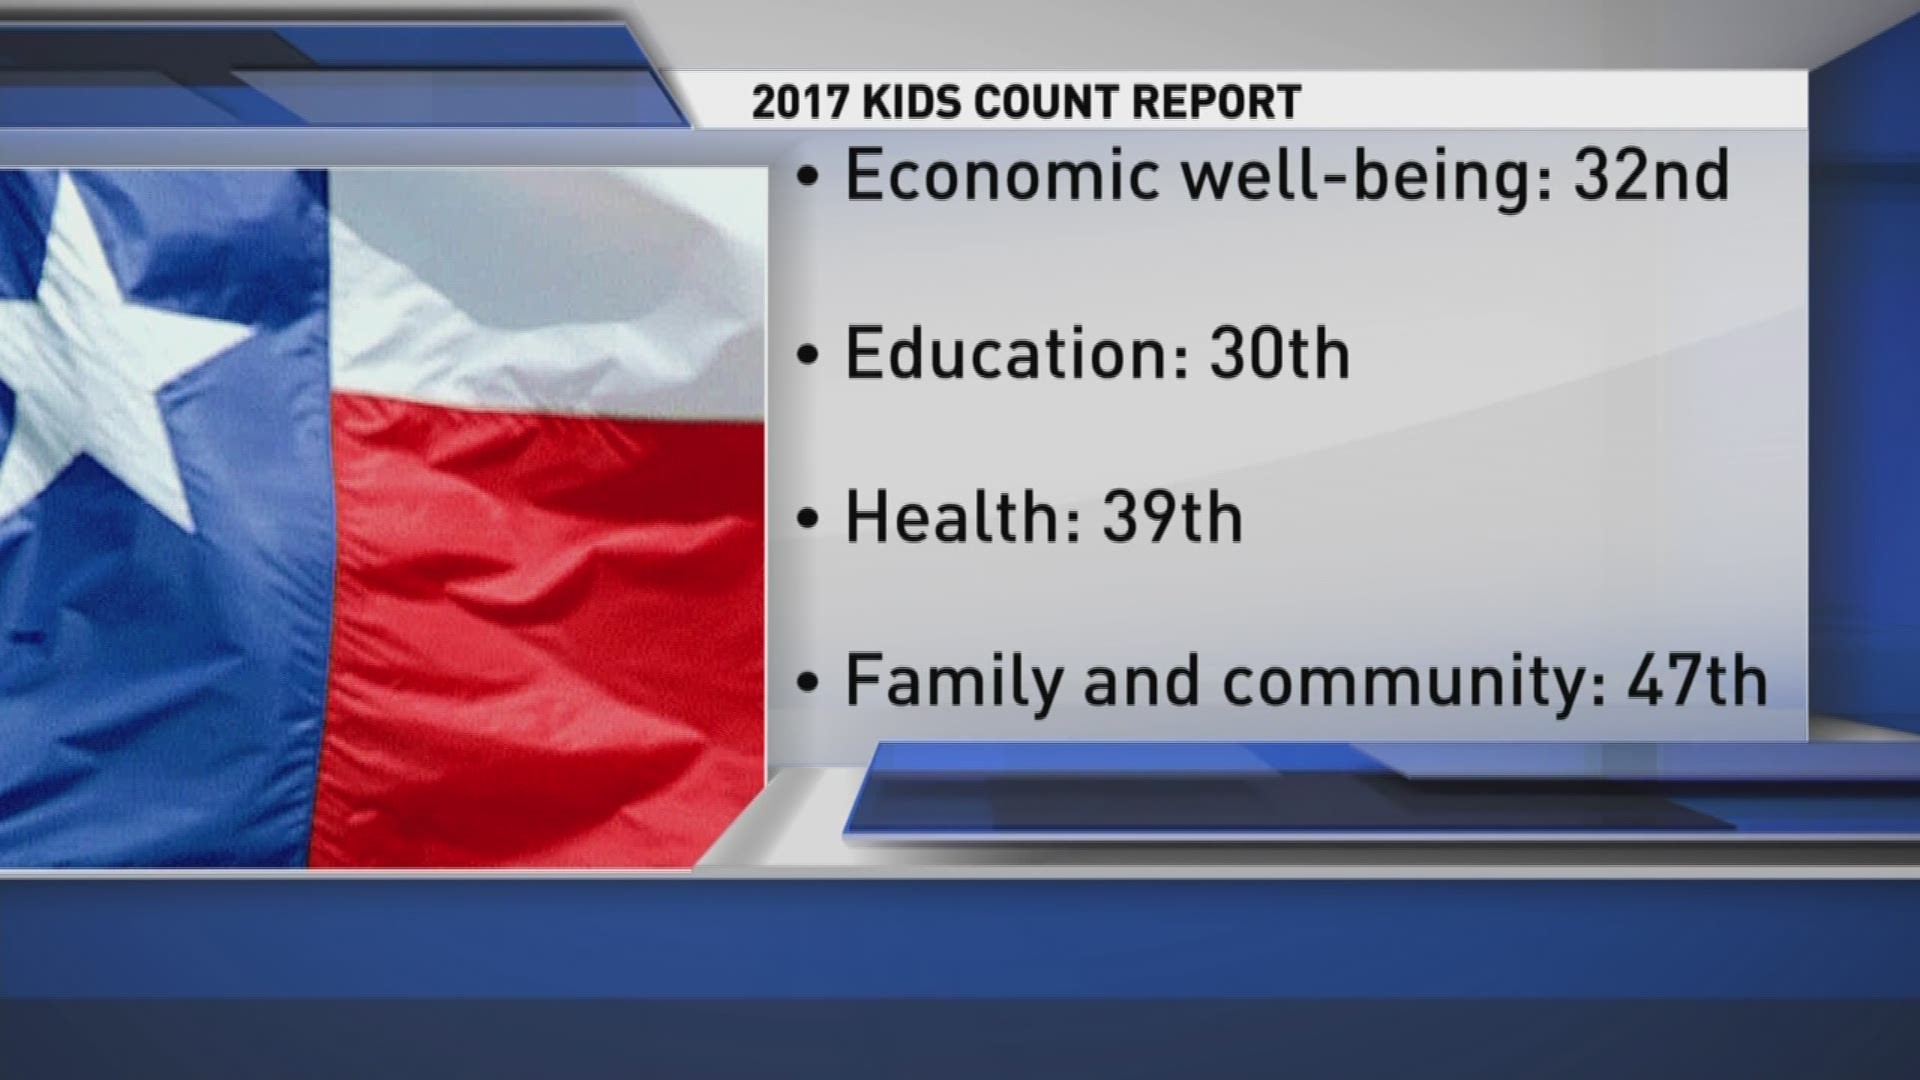 Texas is failing when it comes to taking care of its children. A study released Tuesday ranks Texas among the worst states in the country